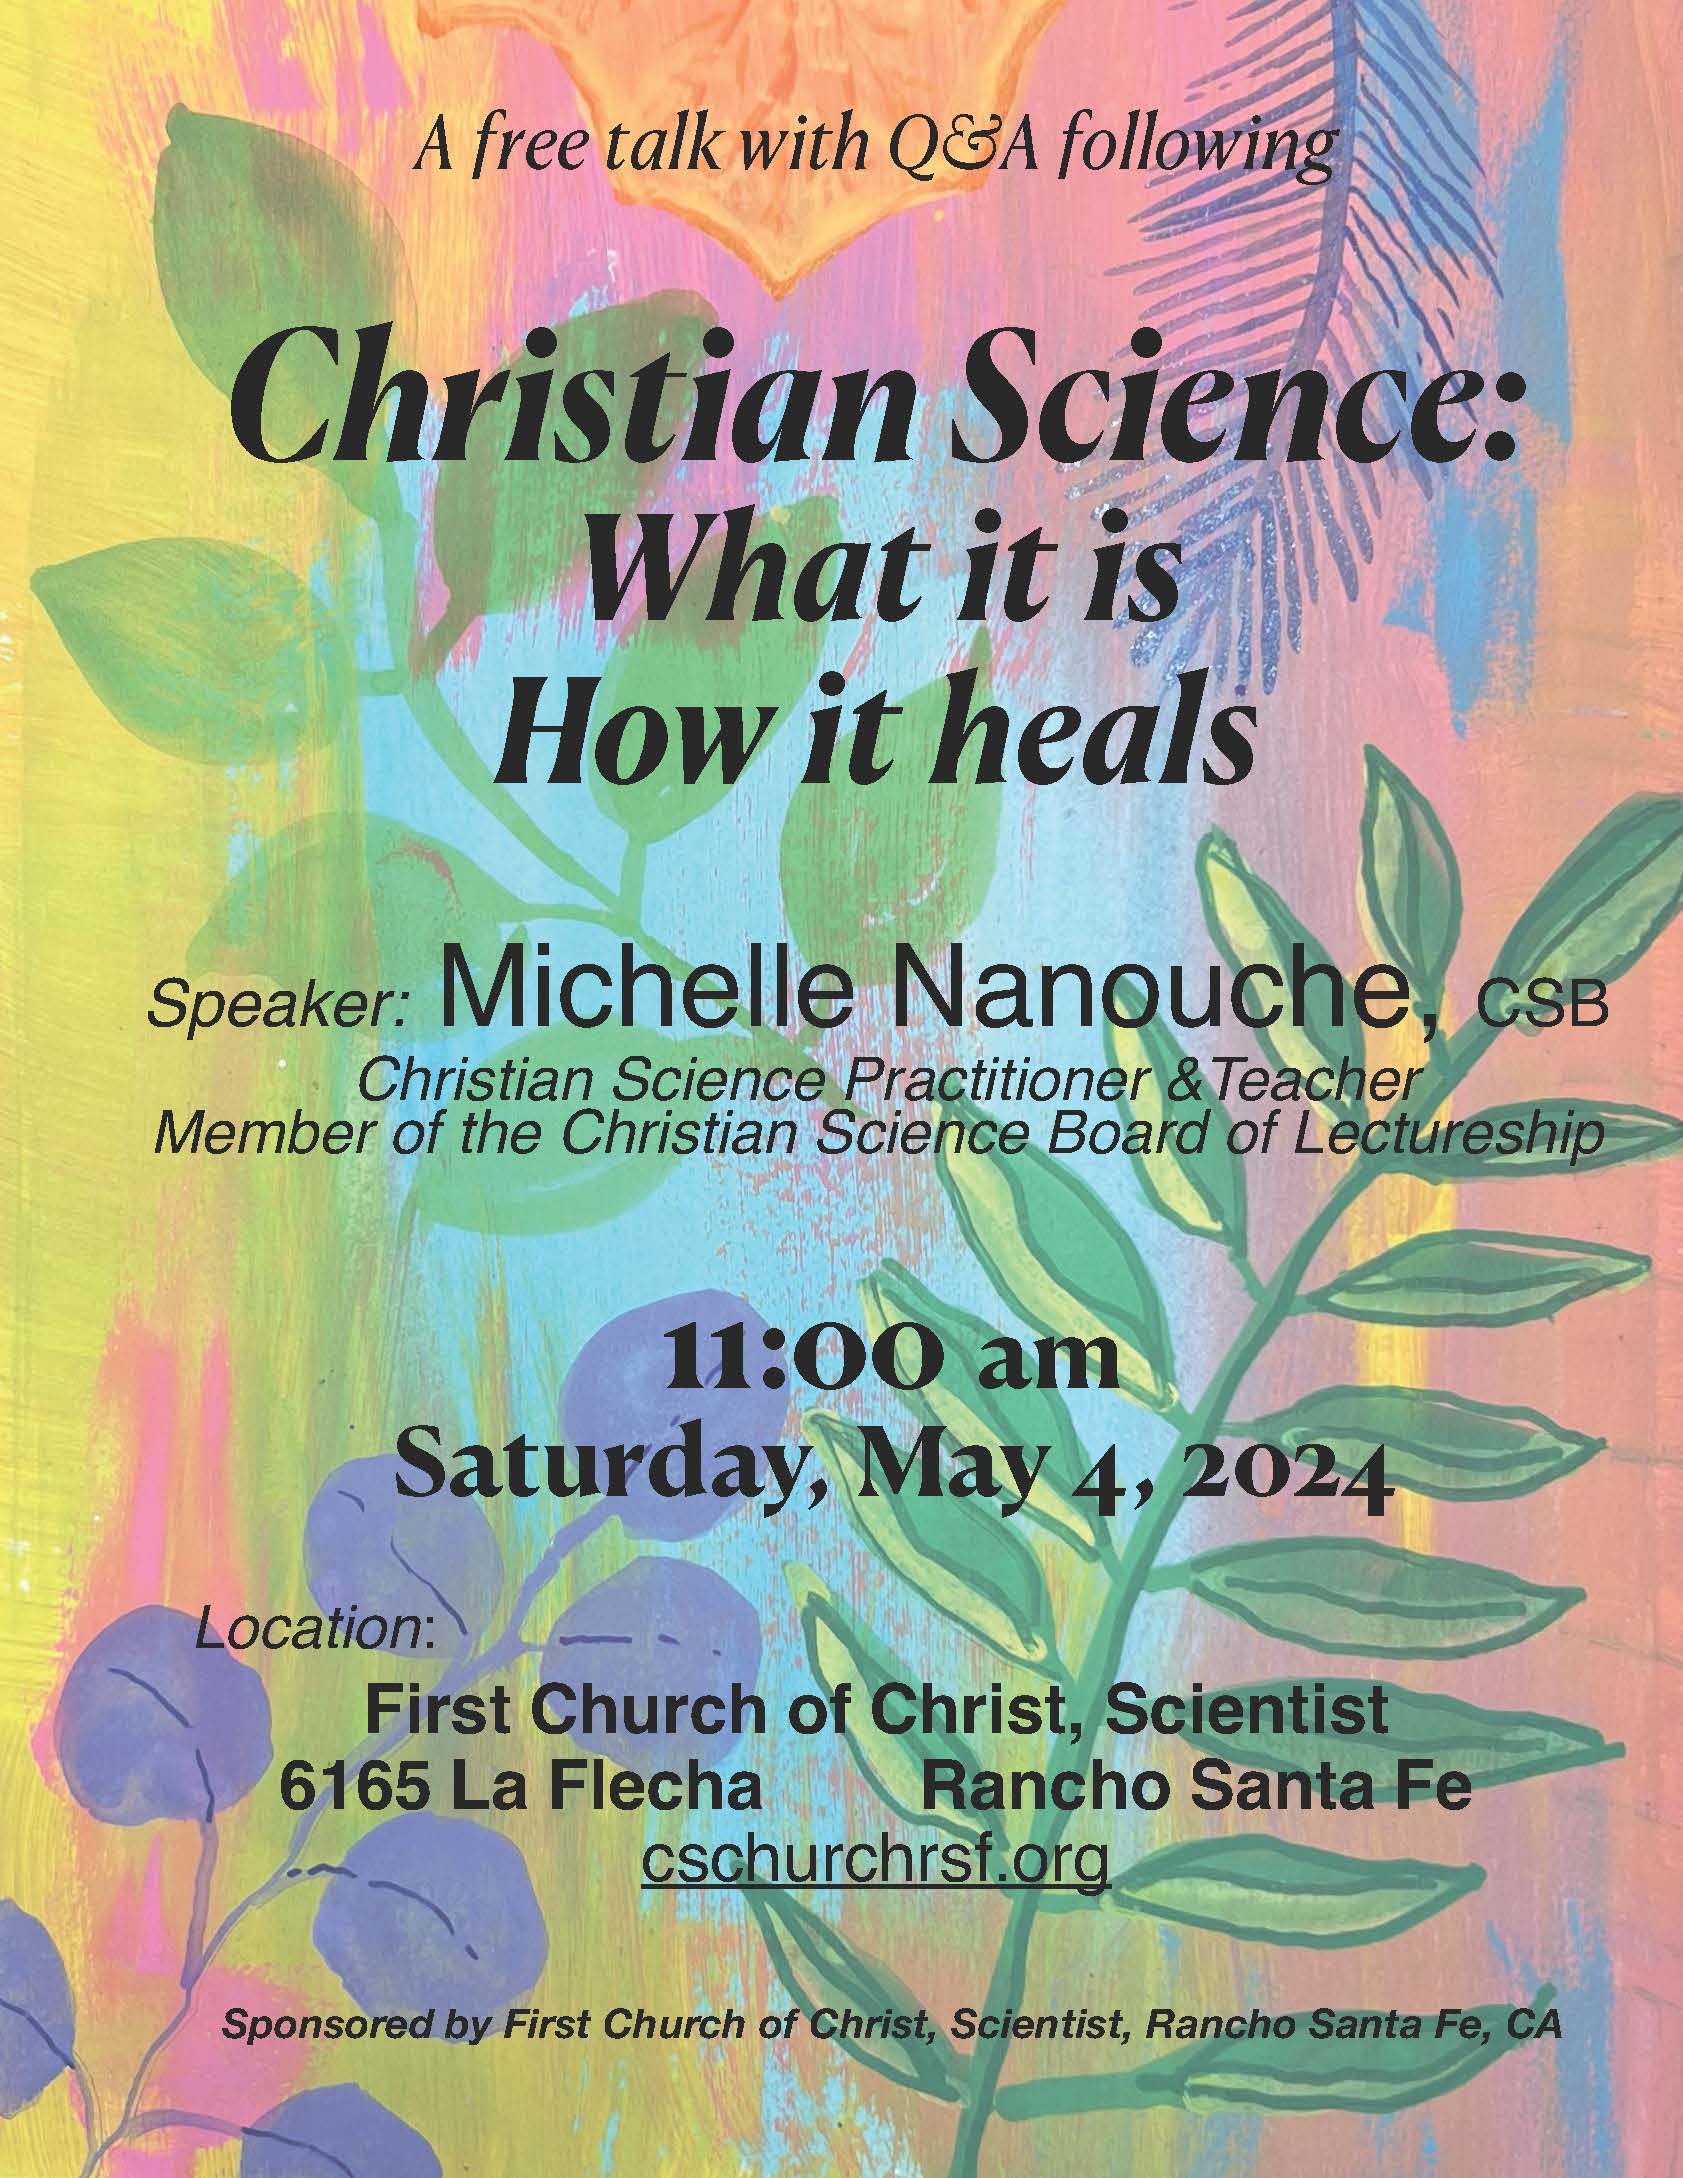 Featured image for “A talk on Christian Science: “What it is / How it heals” by Michelle Nanouche, CSB”